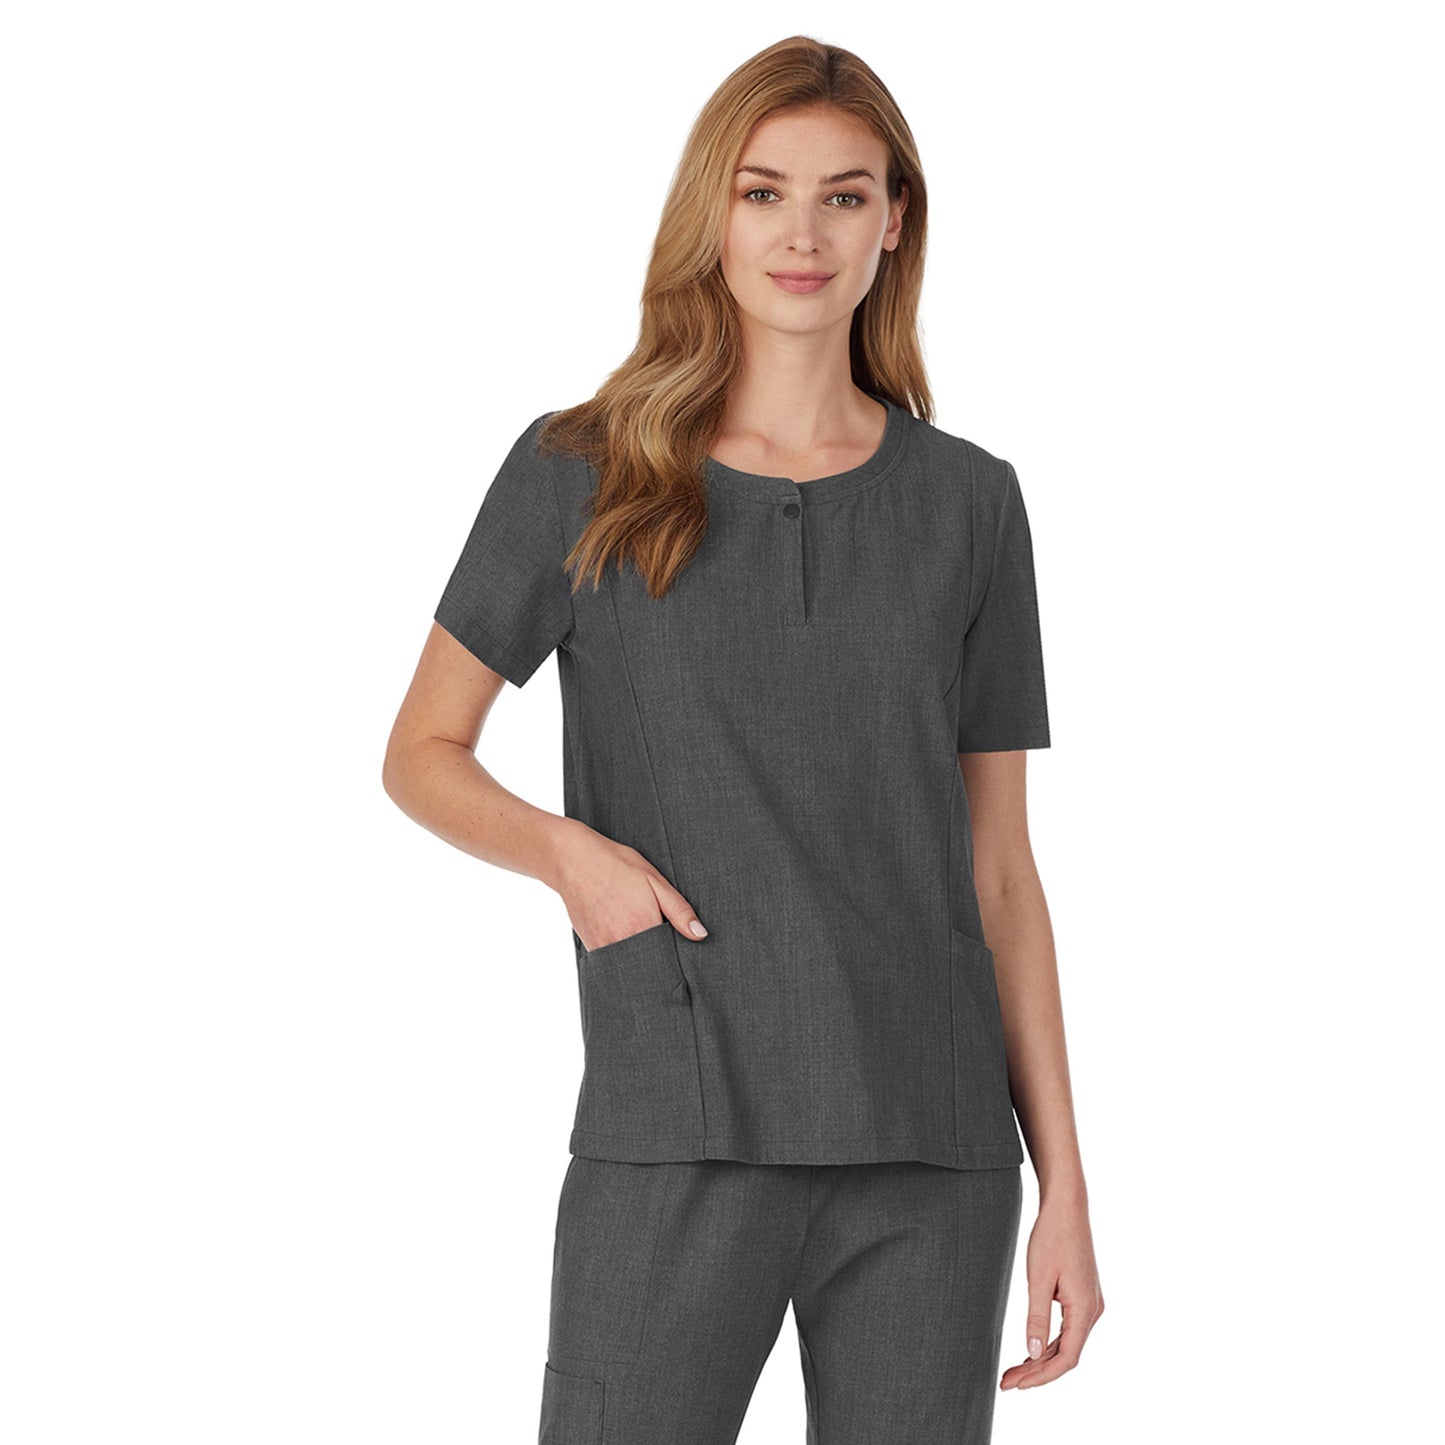 Charcoal Heather;@A lady wearing charcoal heather scrub henley neck top with side pockets petite.